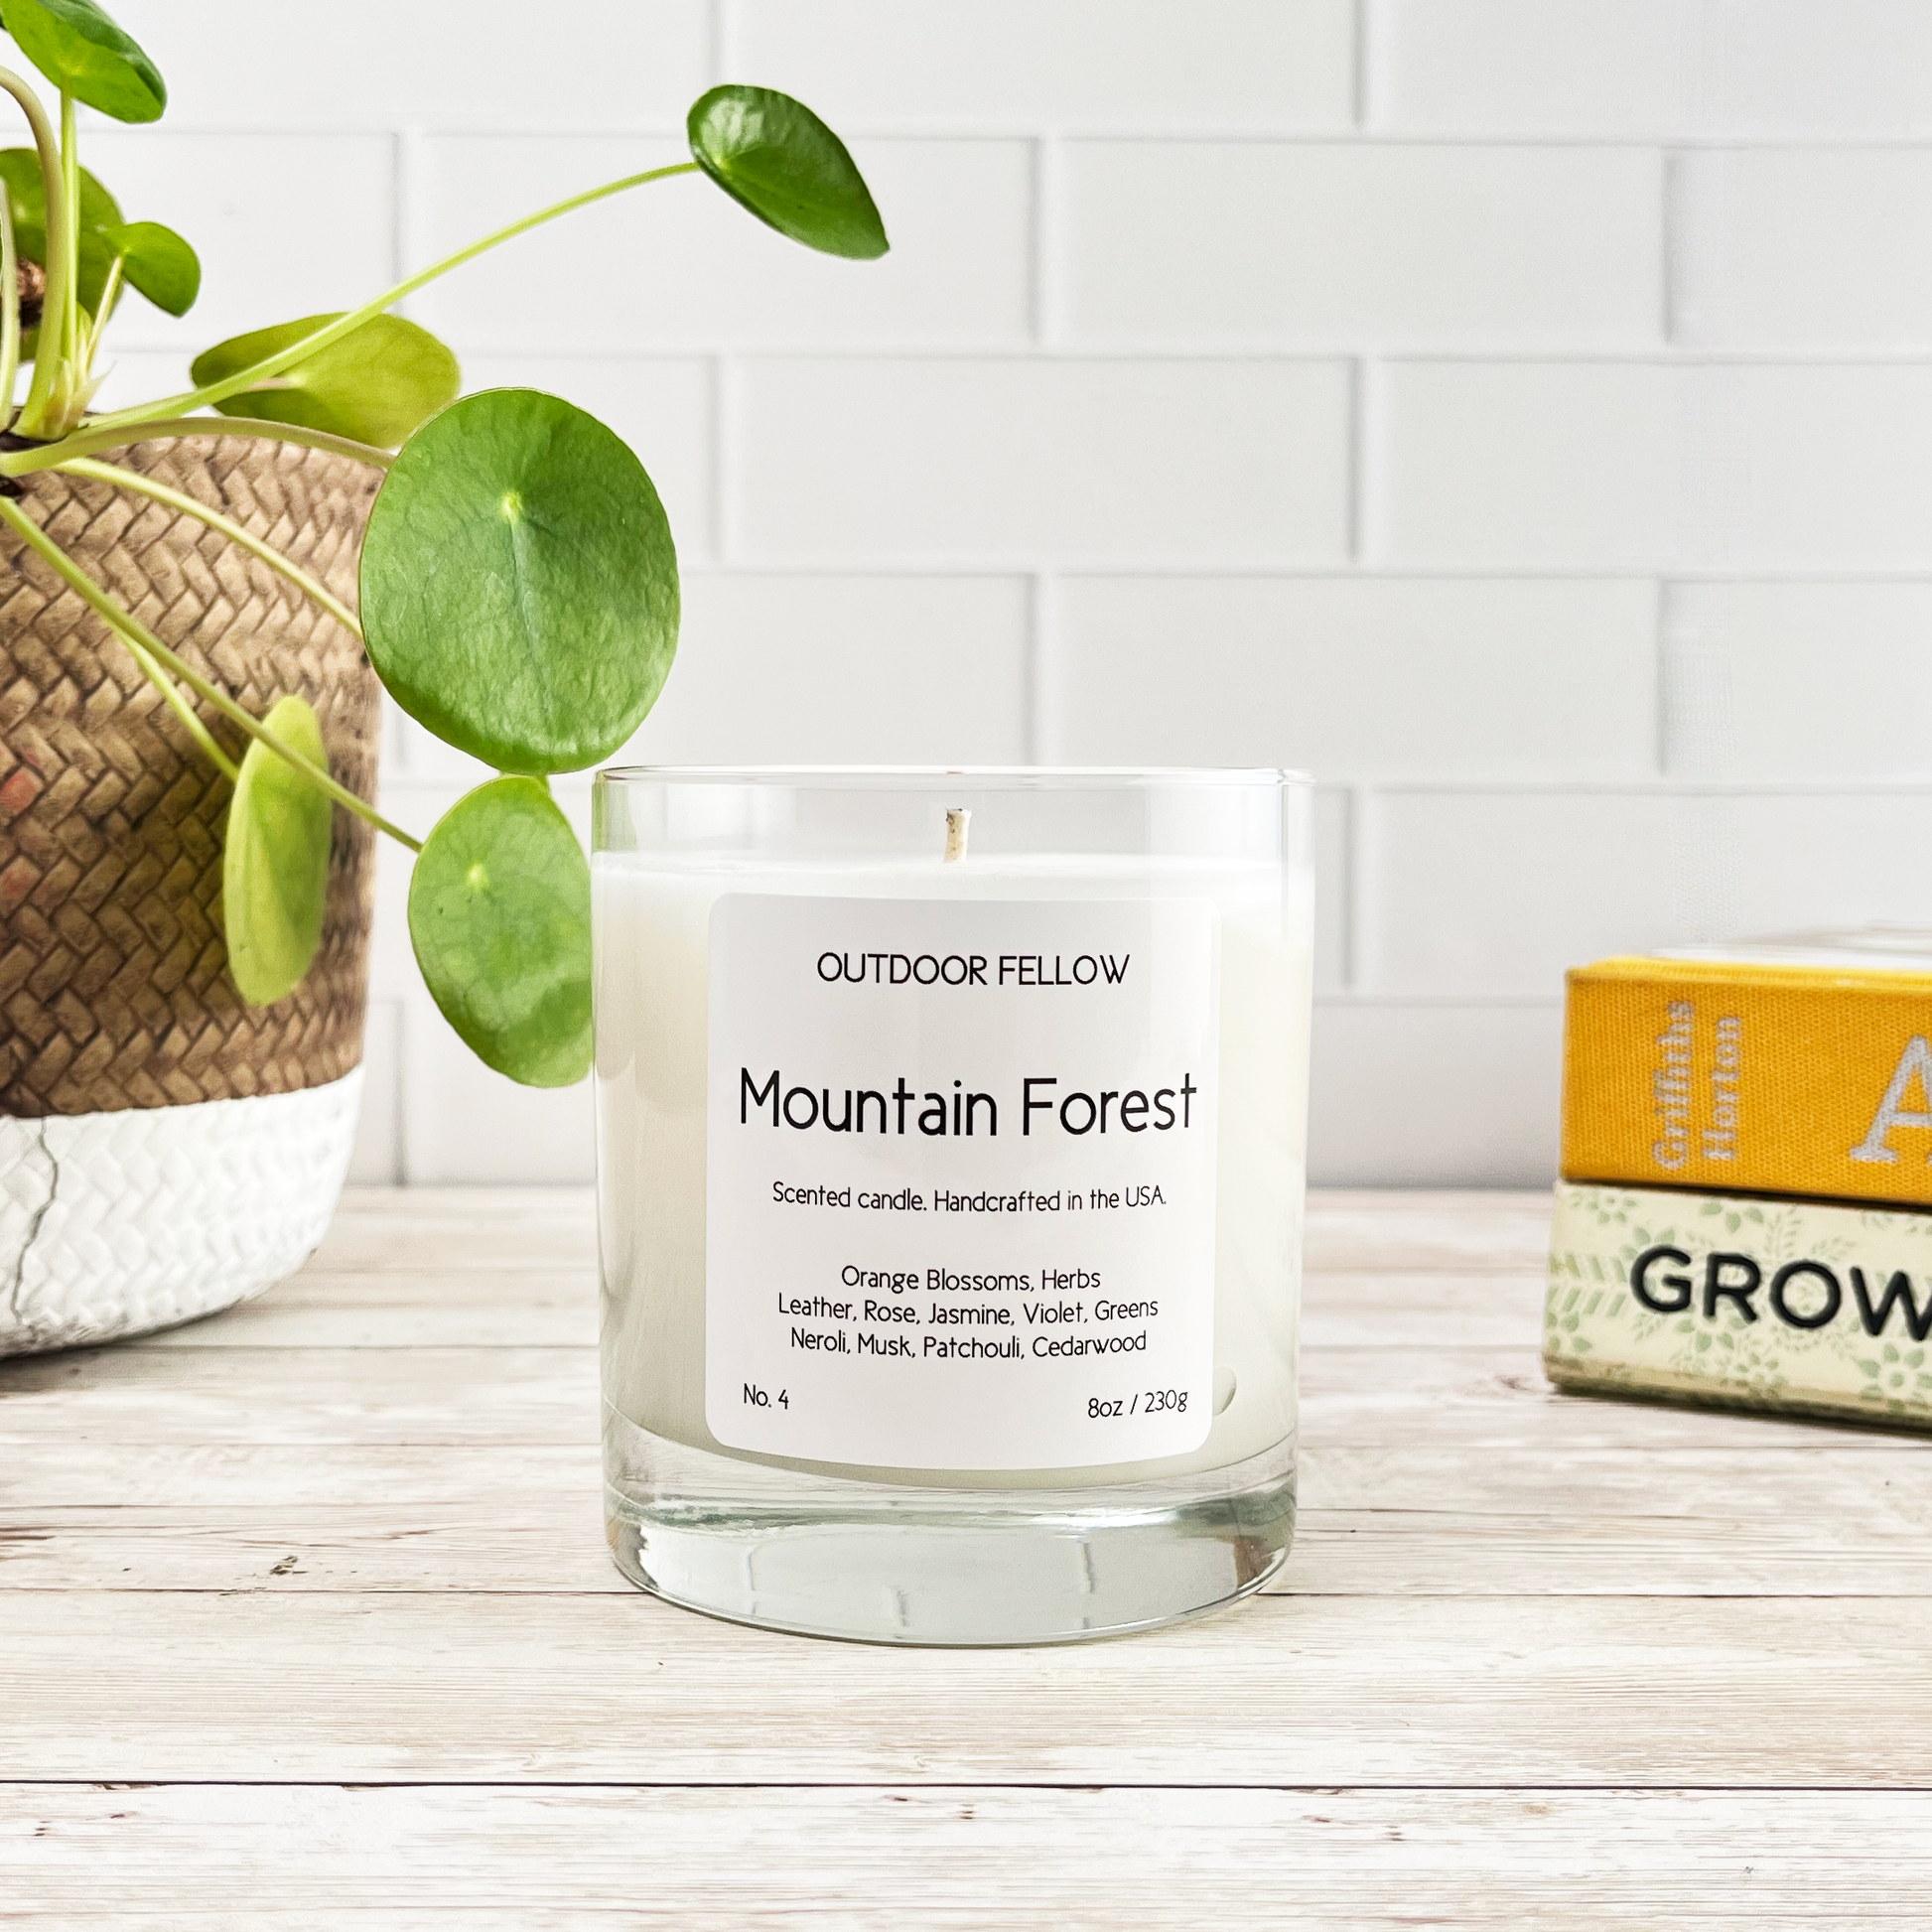 Mountain Forest scented candle